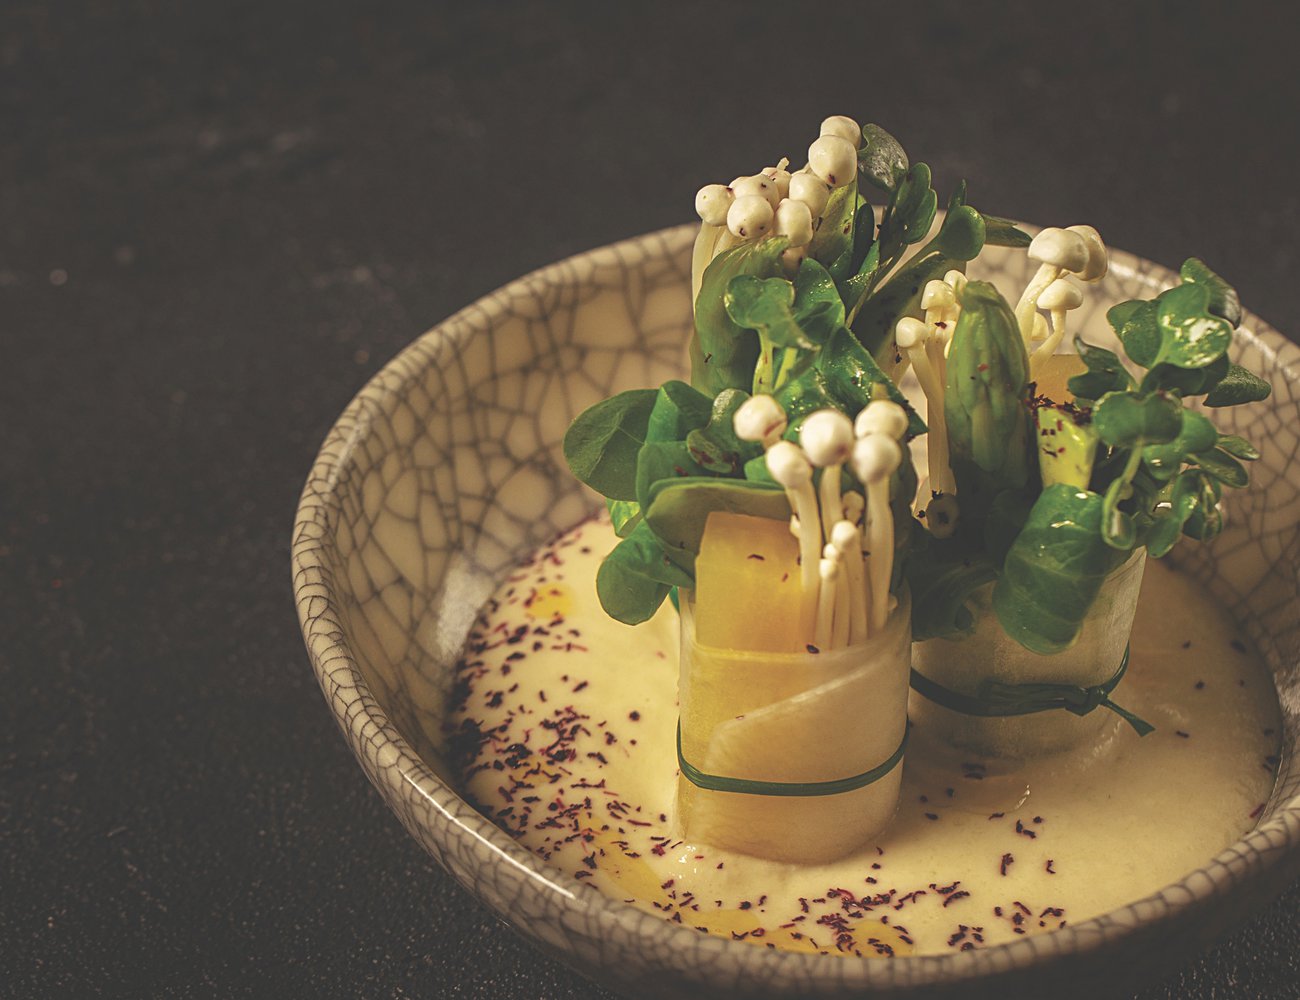 Daikon salad with wild ginger dressing – one of the many exquisite dishes at Taiko.jpg